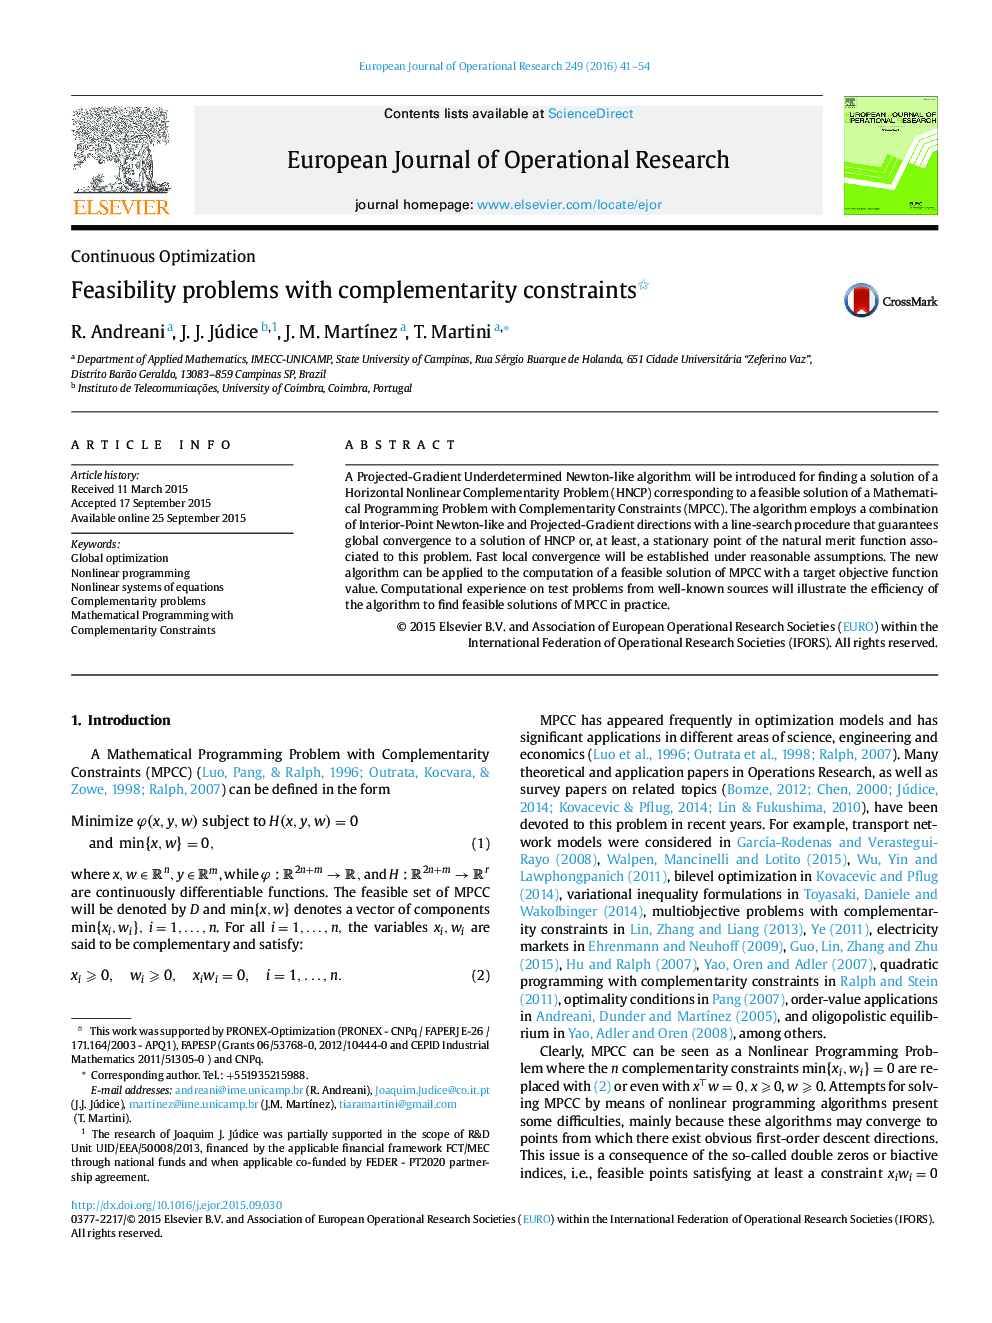 Feasibility problems with complementarity constraints 